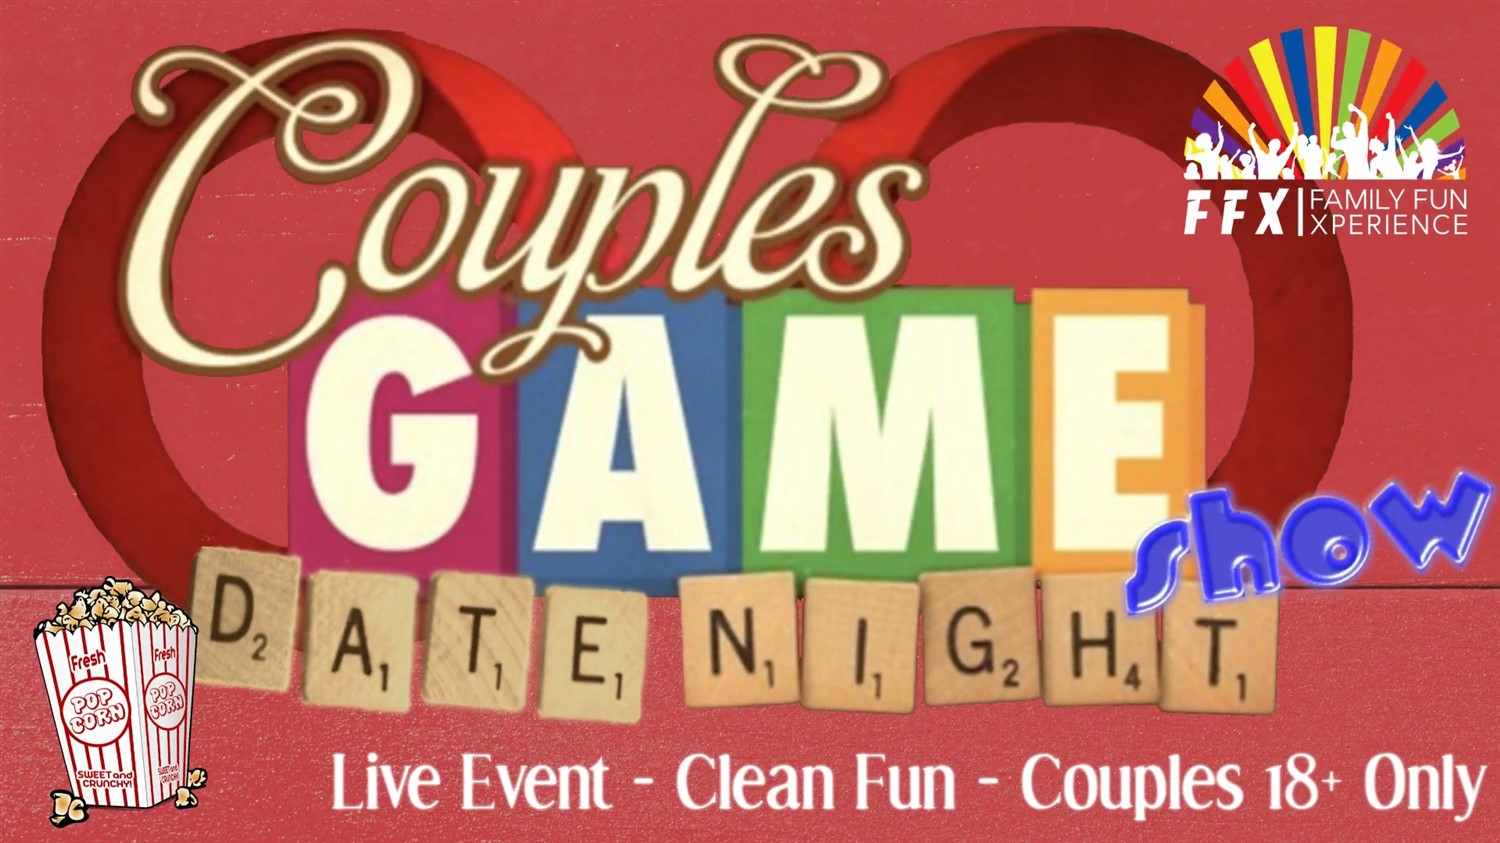 Couples Date Night Game Show! Live Game Show - Couples Only - Date Night FUN! on Aug 04, 19:00@FFX Theatre - Pick a seat, Buy tickets and Get information on Family Fun Xperience tickets.ffxshow.org